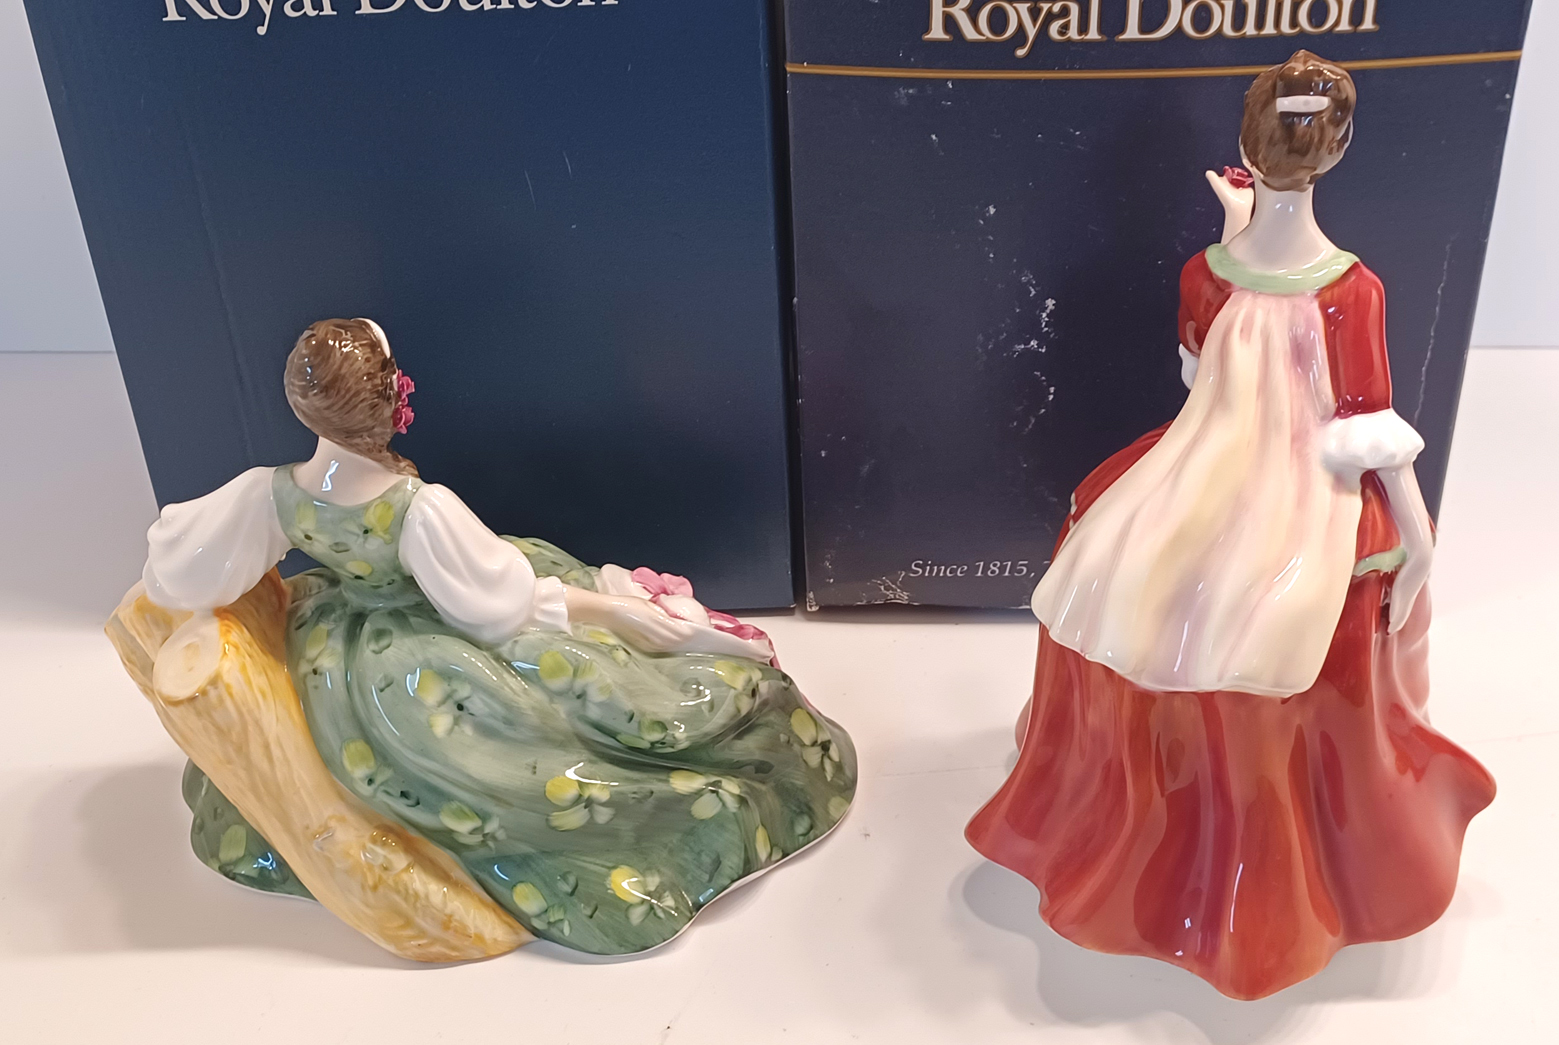 2 ROYAL DOULTON LADIES FIGURINES BOXED - HN2474 ELYSE AND HN3970 FLOWER OF LOVE  - Image 2 of 3